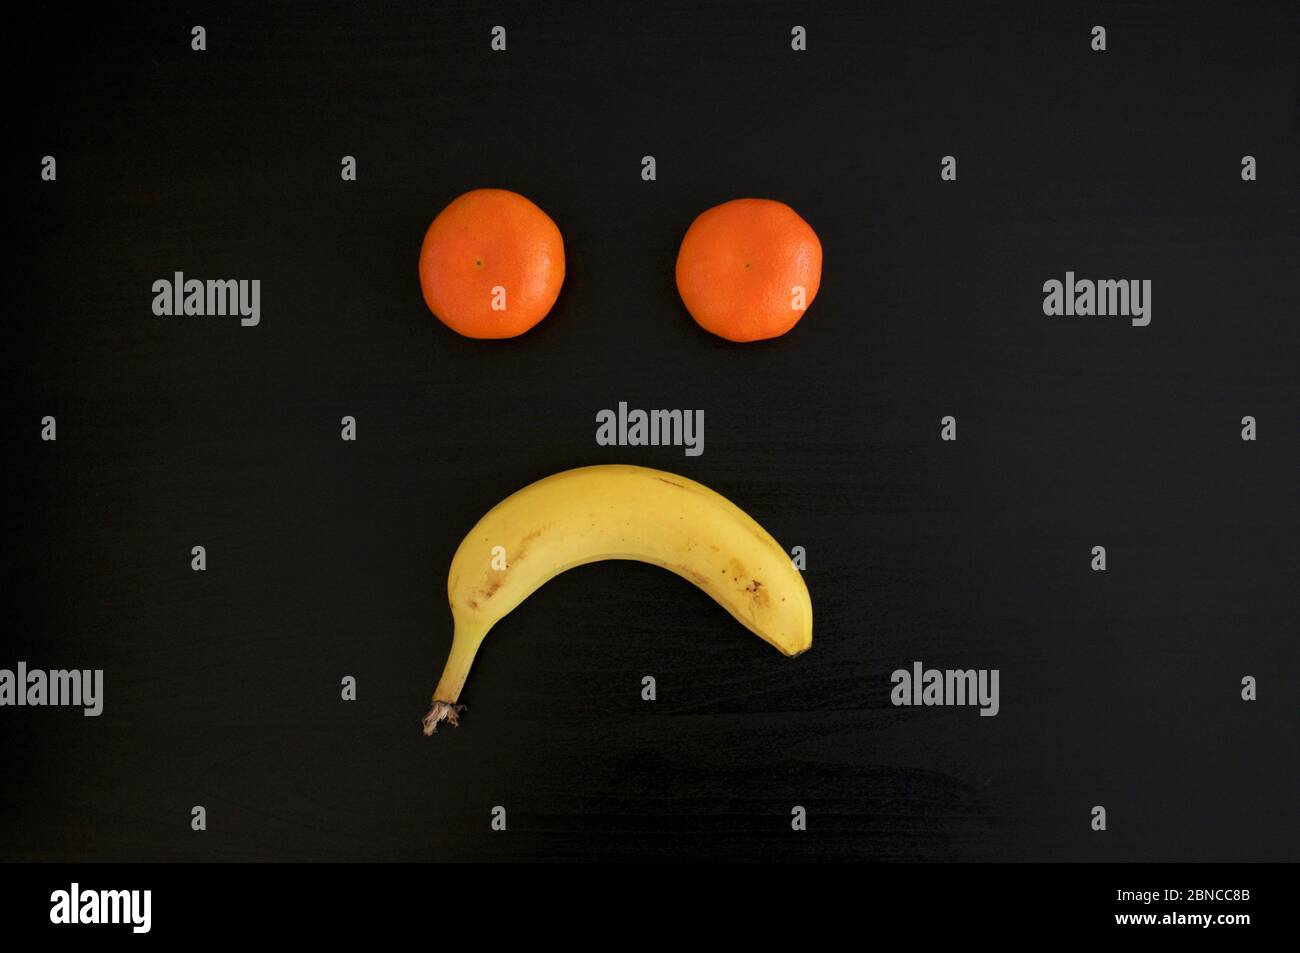 A sad grimace made out of tangerines and a banana on black background.This can be used for conceptual photo as sadness, depression, and negativity Stock Photo